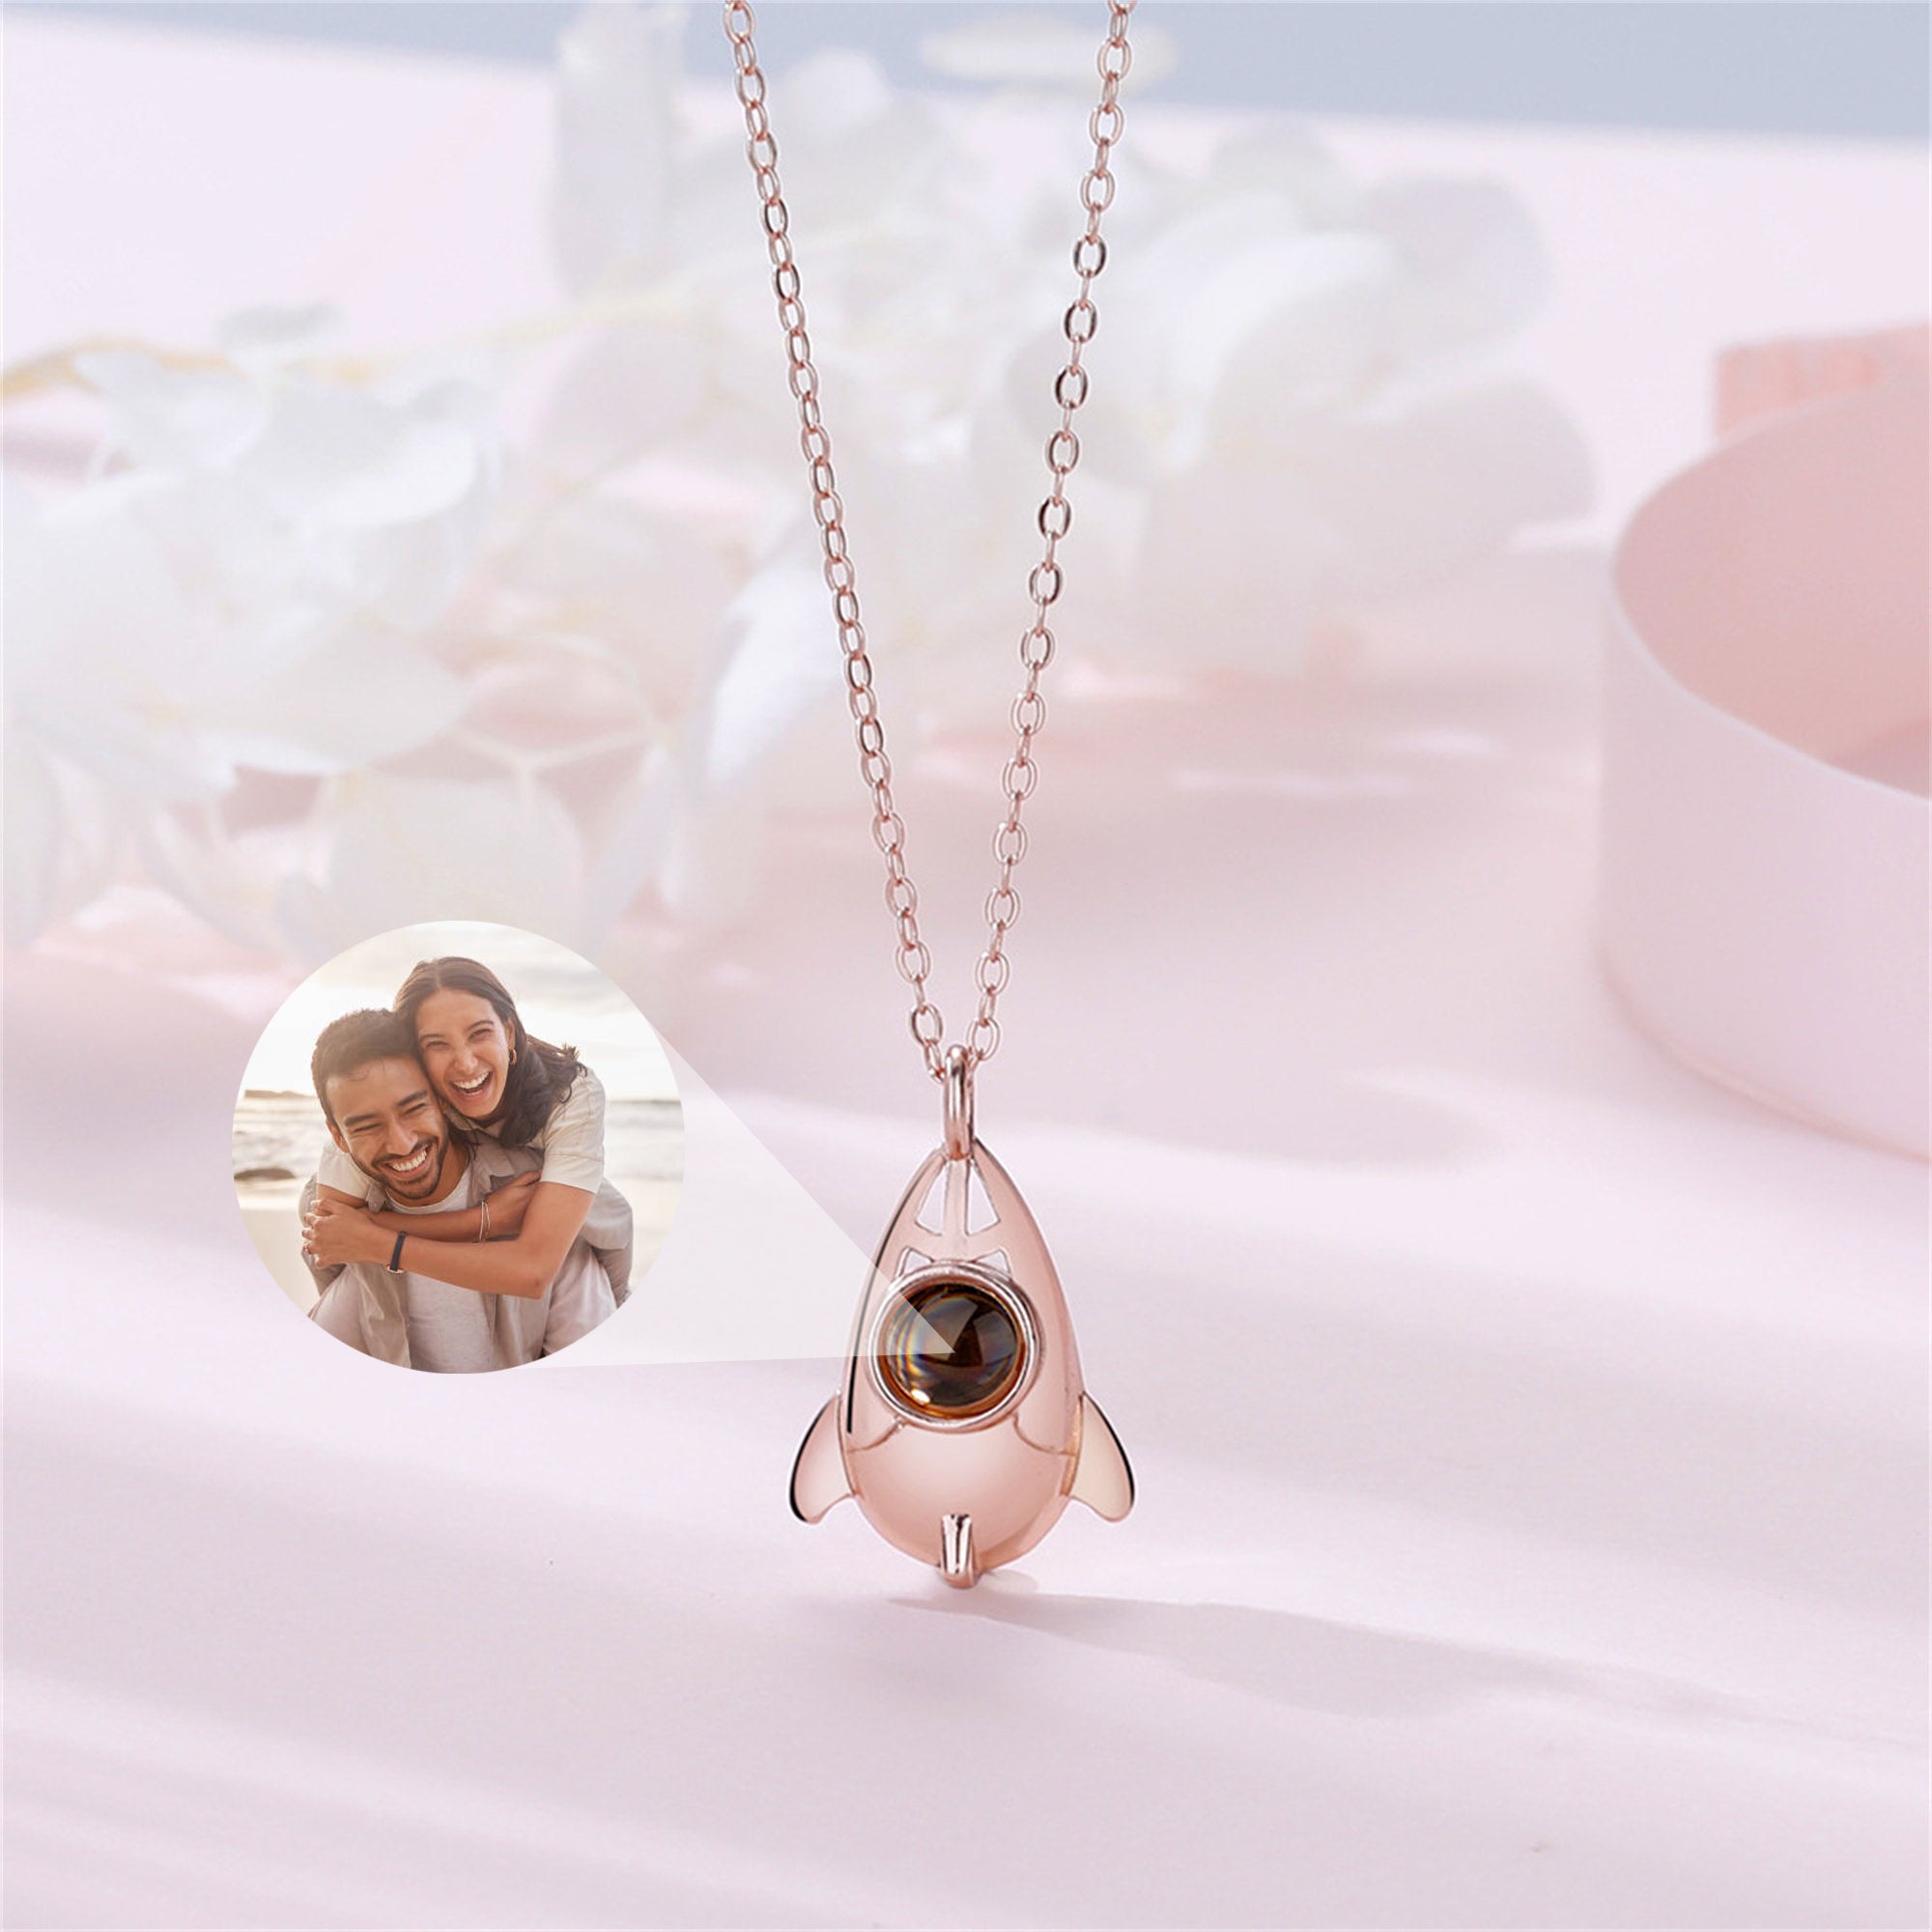 Customized Projection Necklaces With Photos Personalized Gift For Family  Friend | eBay